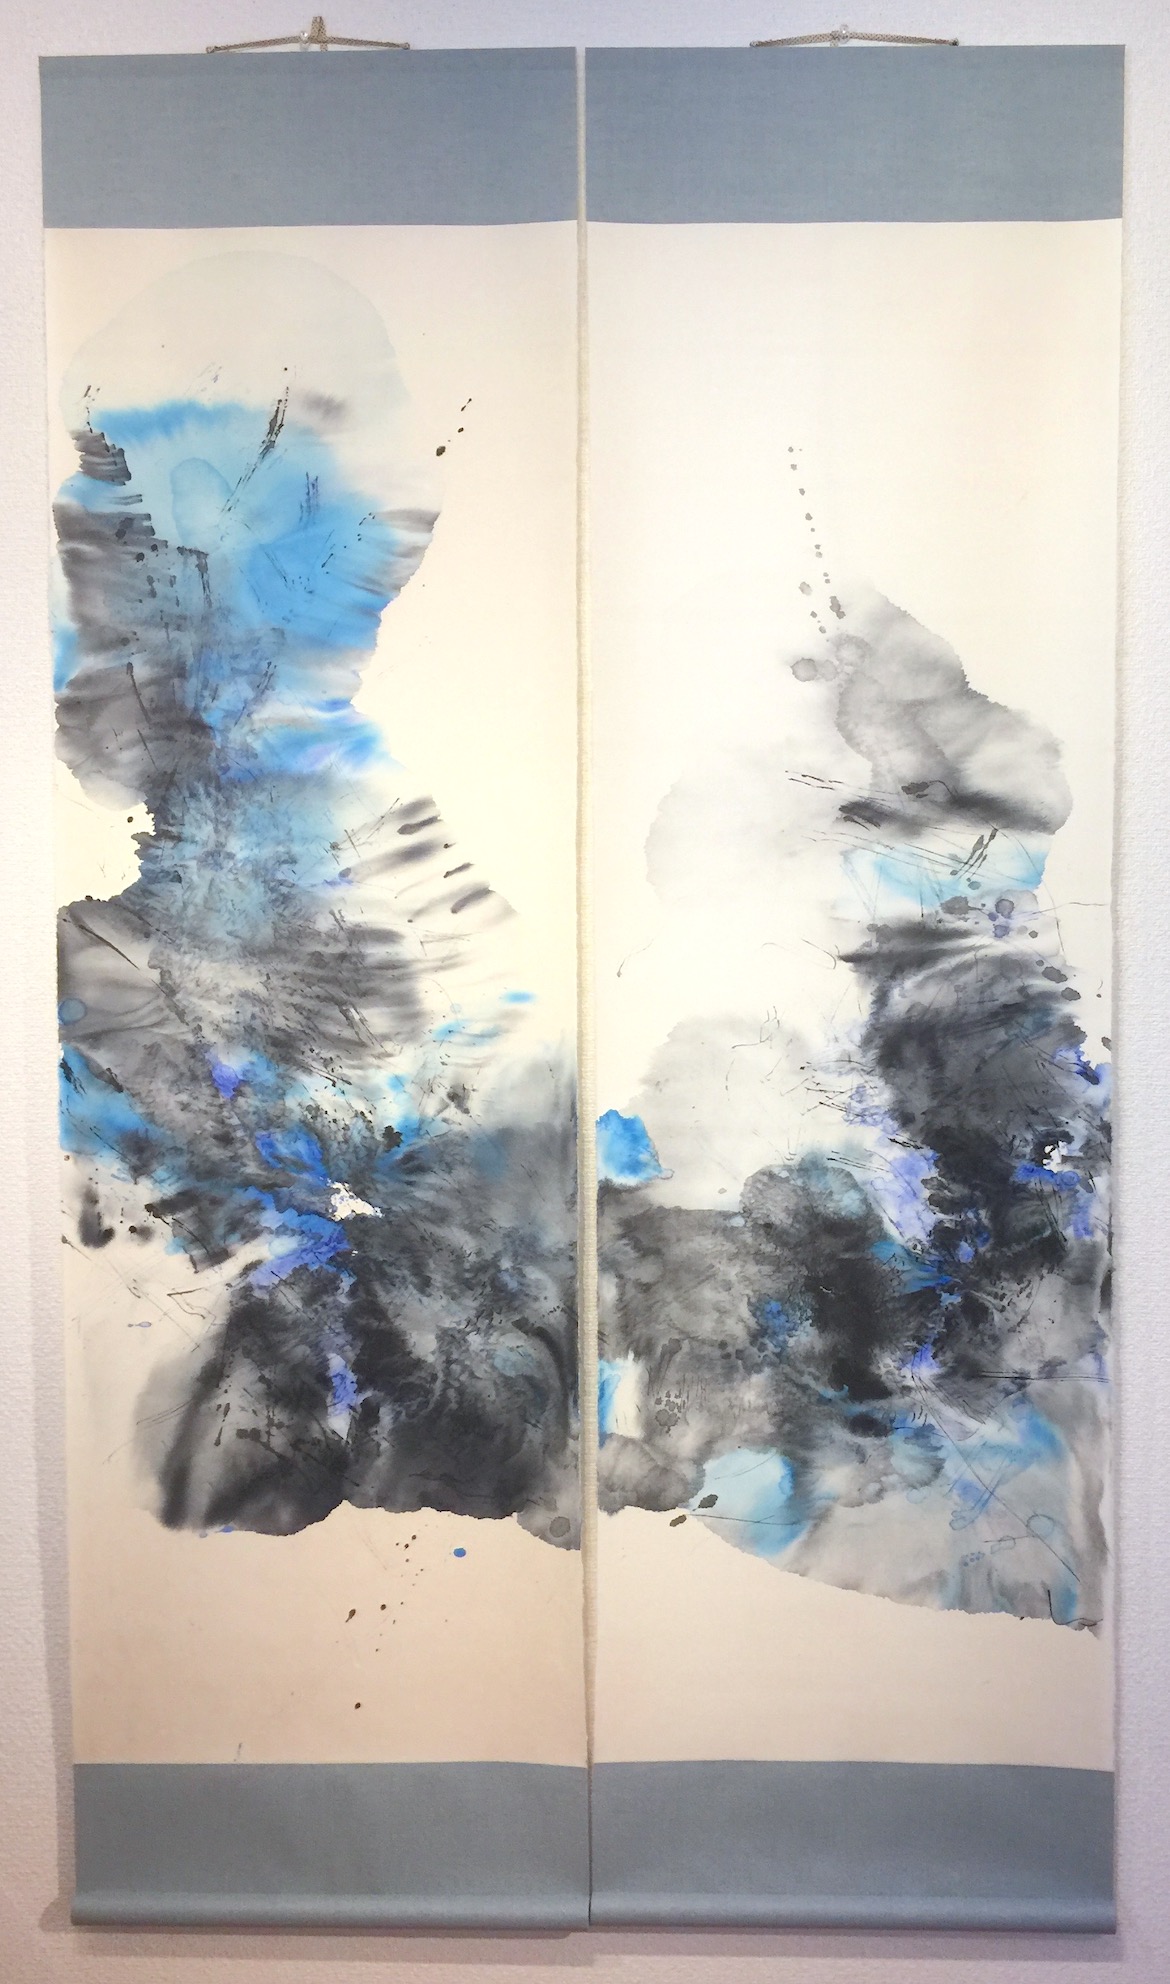 Waters Rising 増水　143 cms x 51 cms 2019 Sumi ink,water colour, acrylic 墨、水彩絵具、アクリル